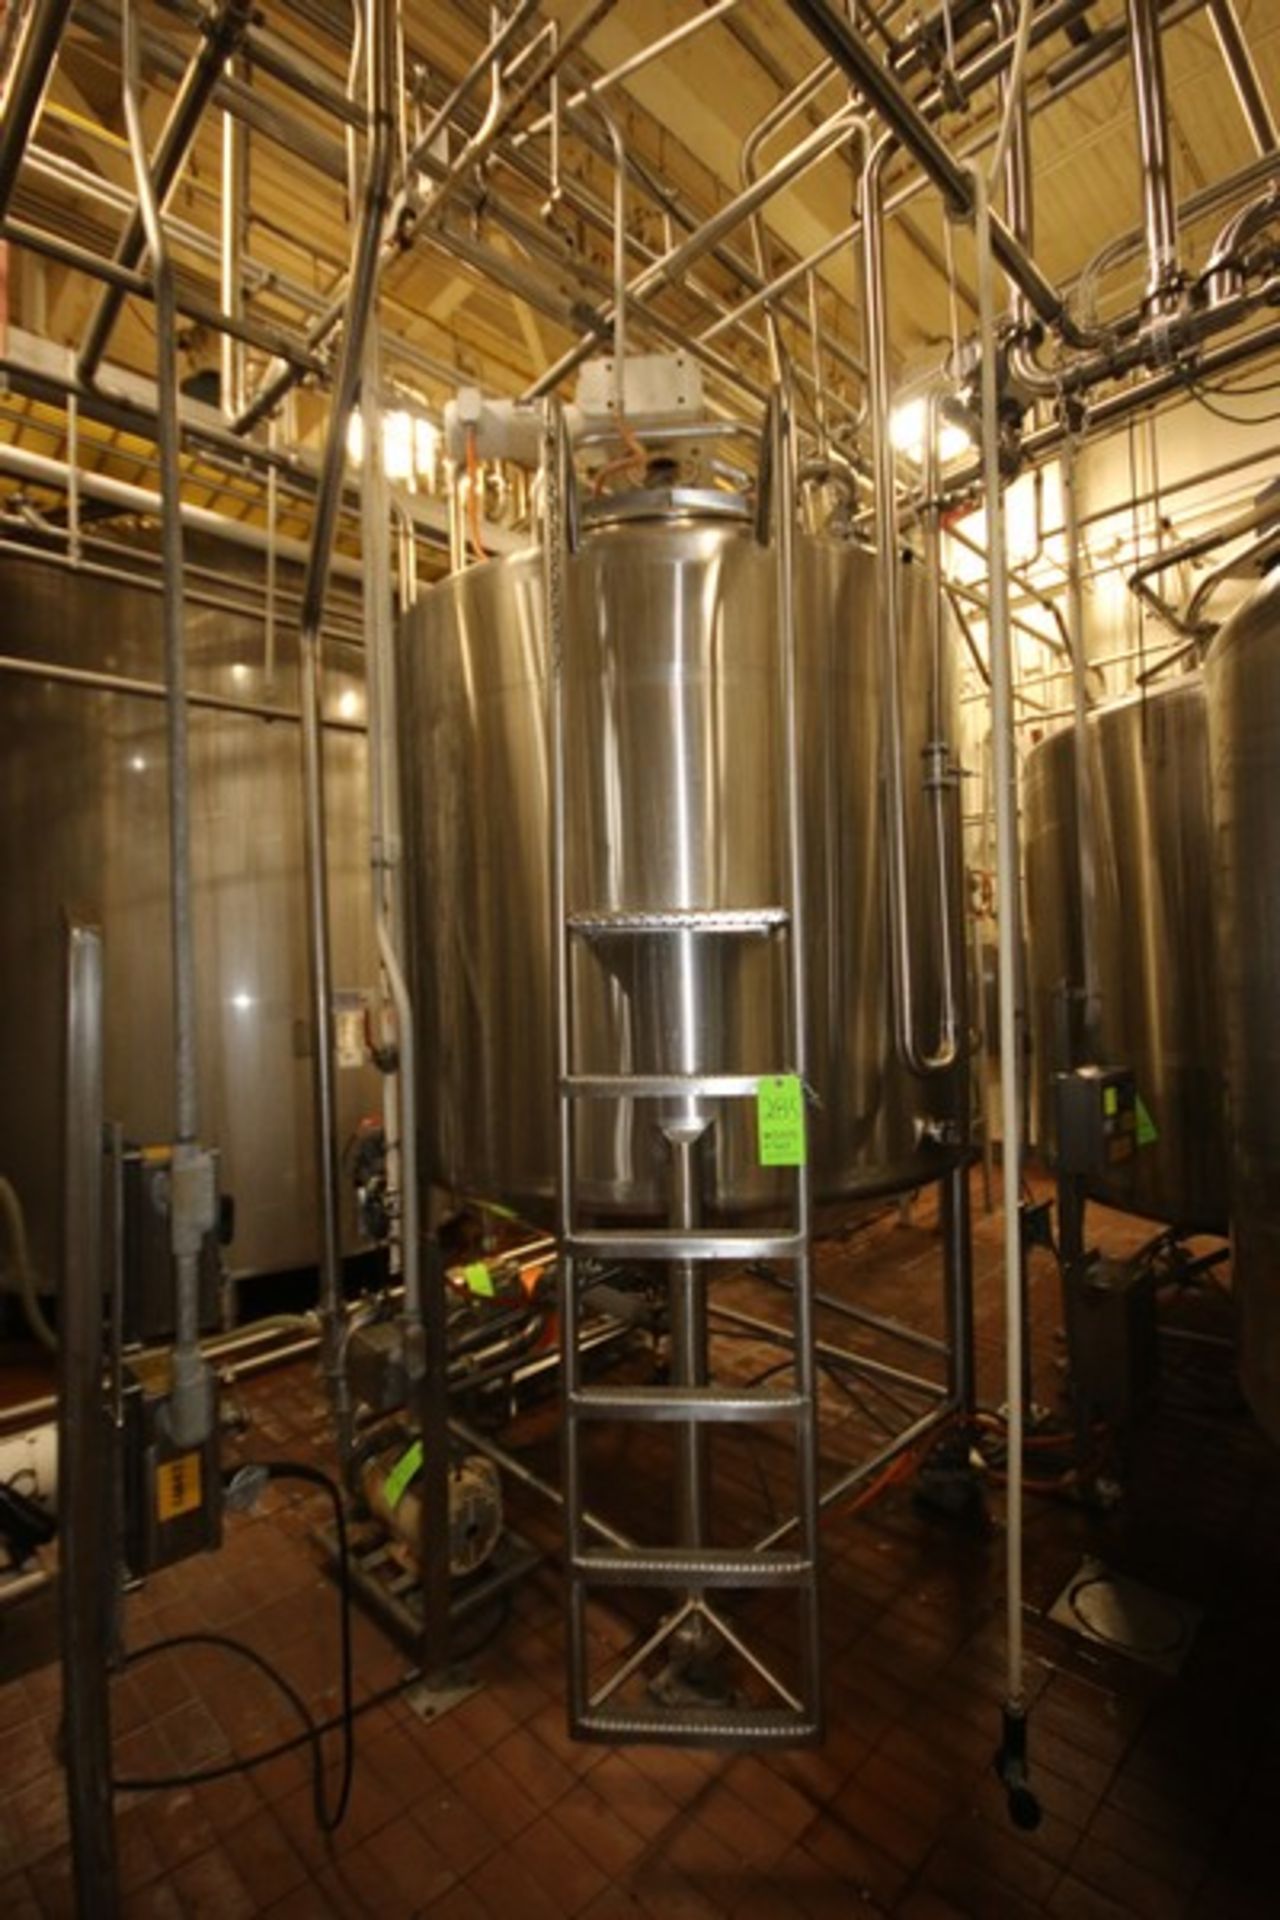 DCI 1,000 Gal. S/S Single Wall Vertical Tank, S/N JS961-A, Dome Top/Cone Bottom, with S/S Legs